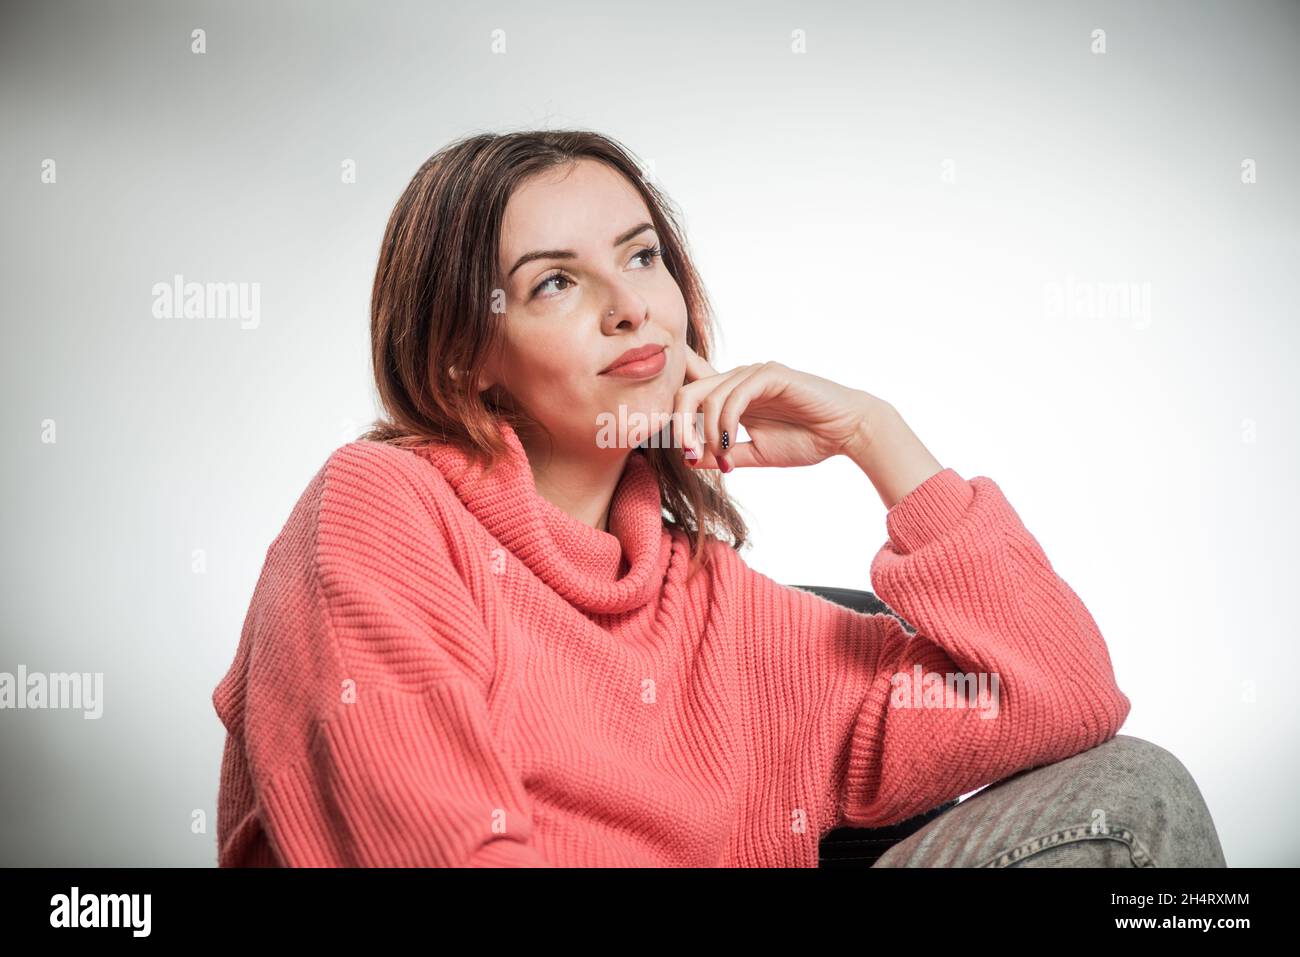 young thinking woman portrait in pink sweater on studio background Stock Photo